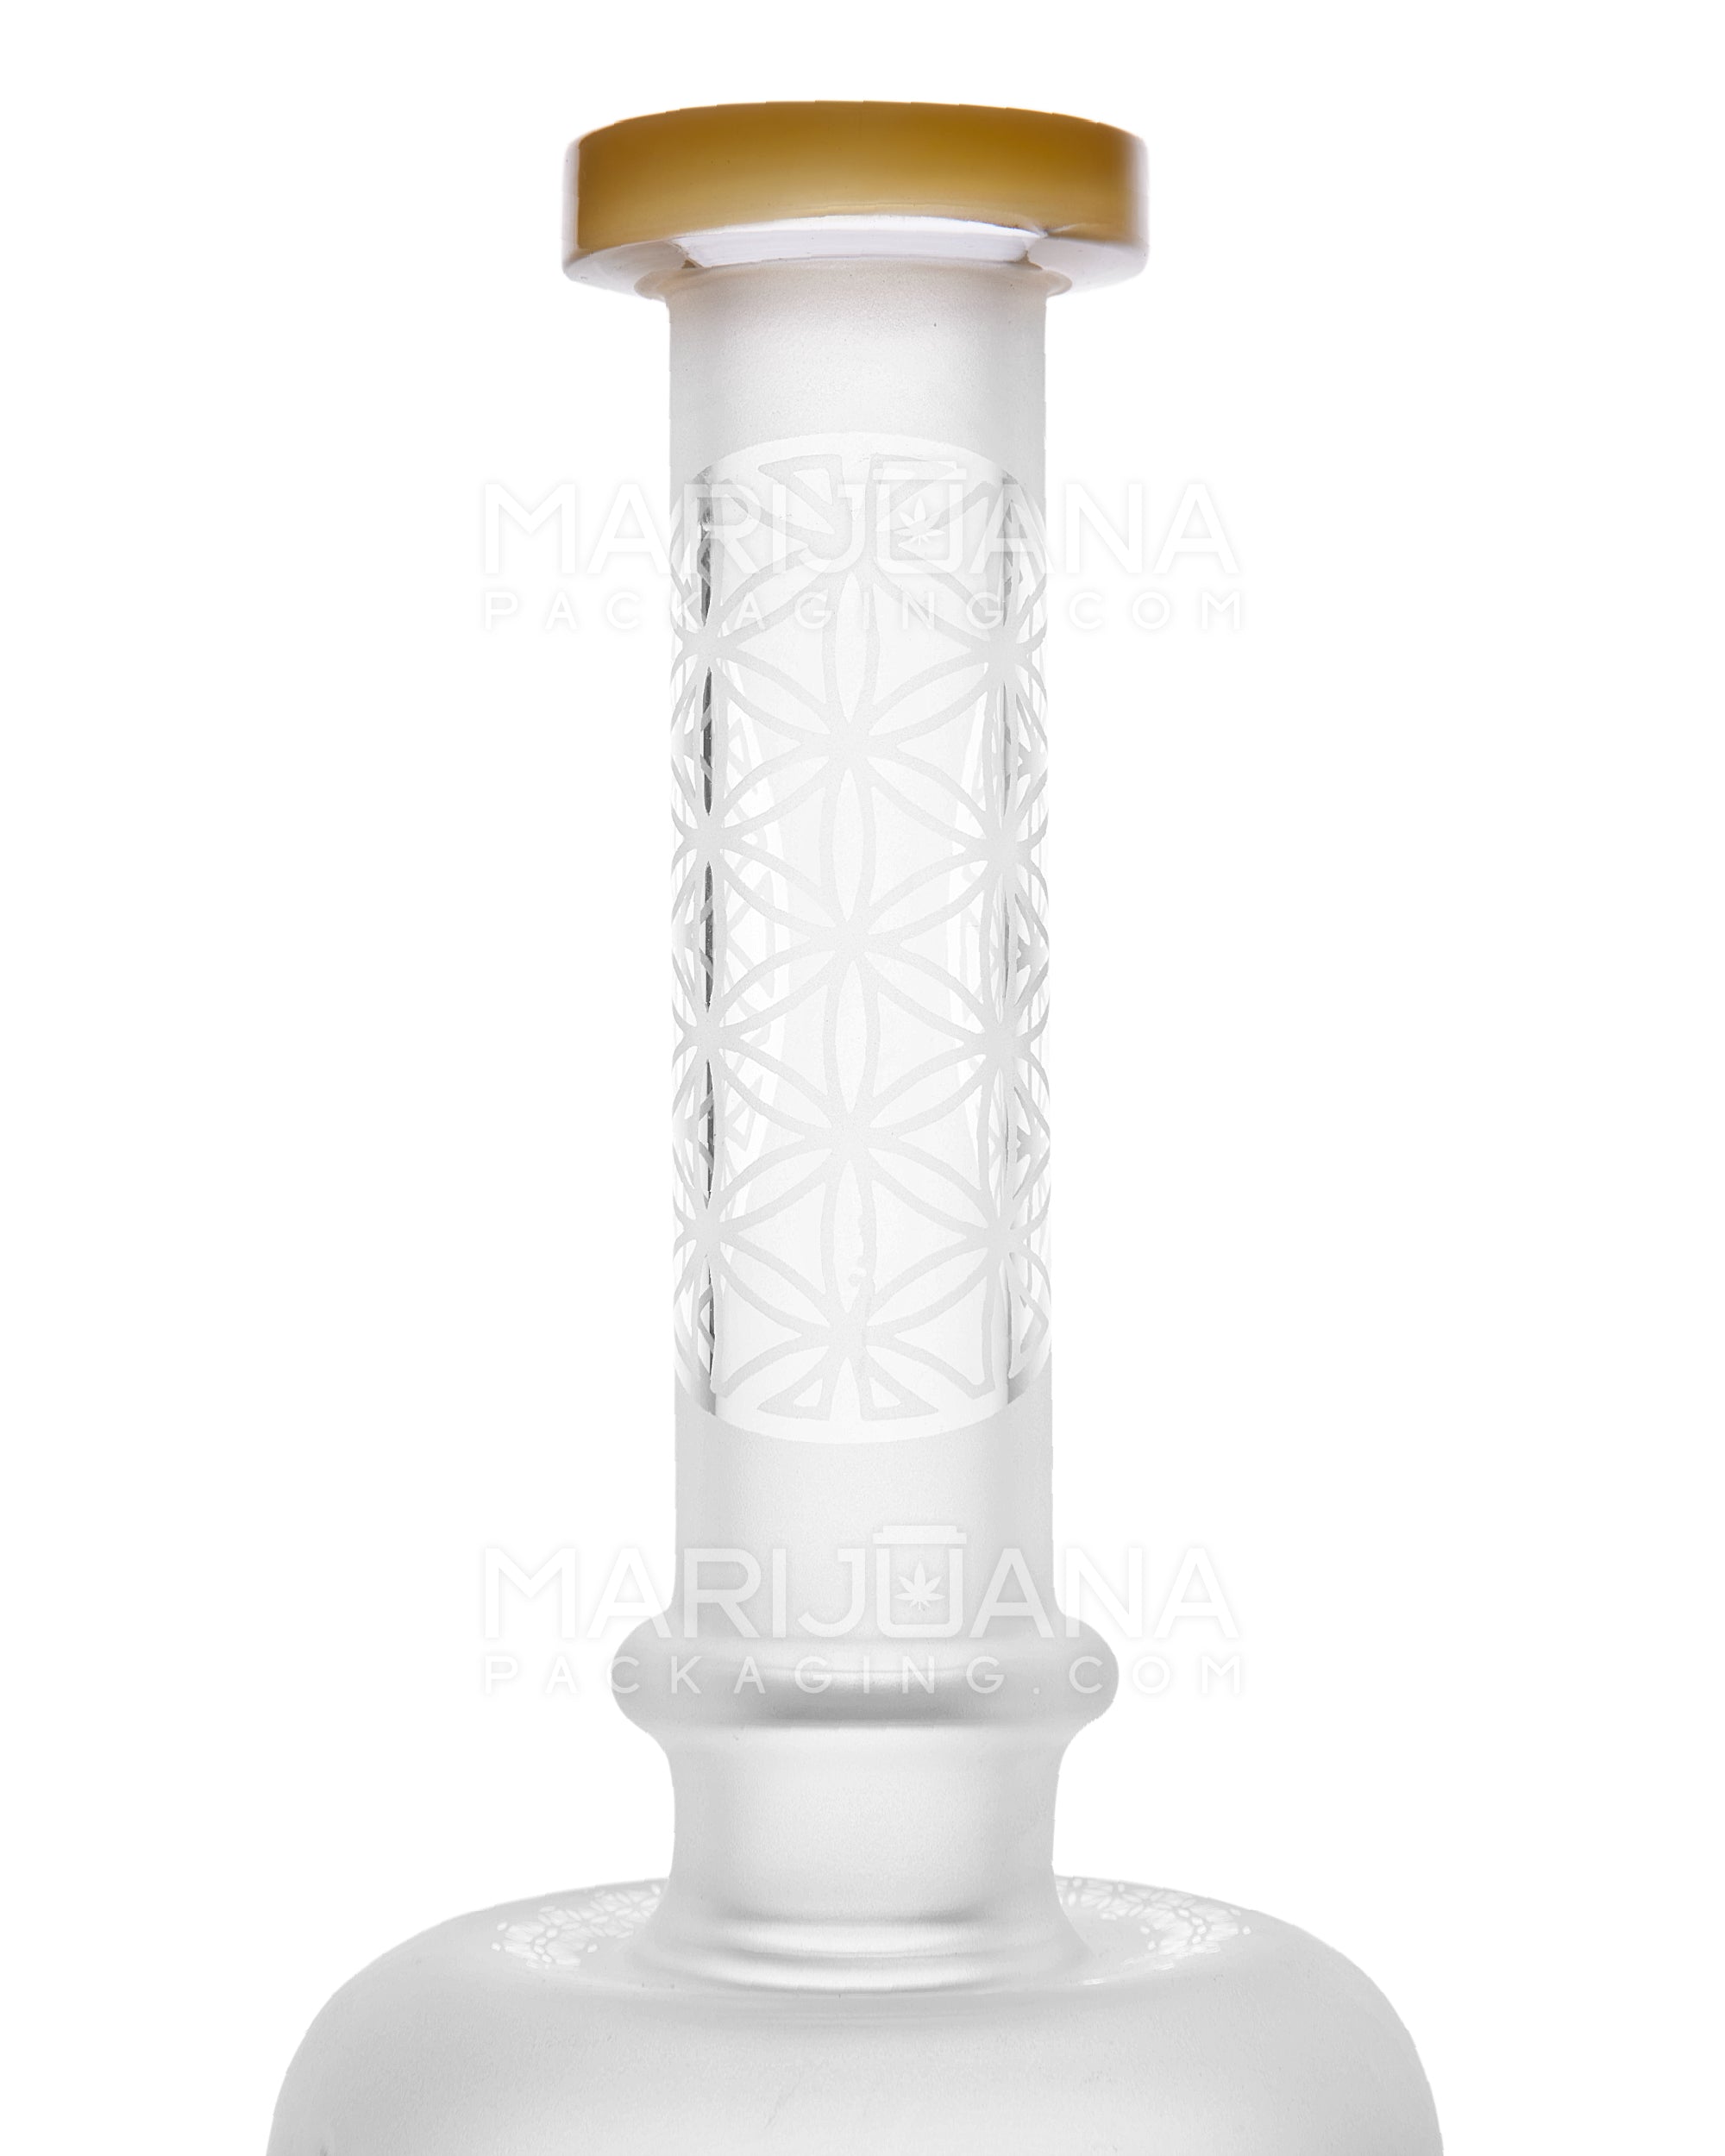 USA Glass | Straight Neck Matrix Perc Sandblasted Glass Water Pipe w/ Implosion Marbles | 11in Tall - 14mm Bowl - Yellow - 4